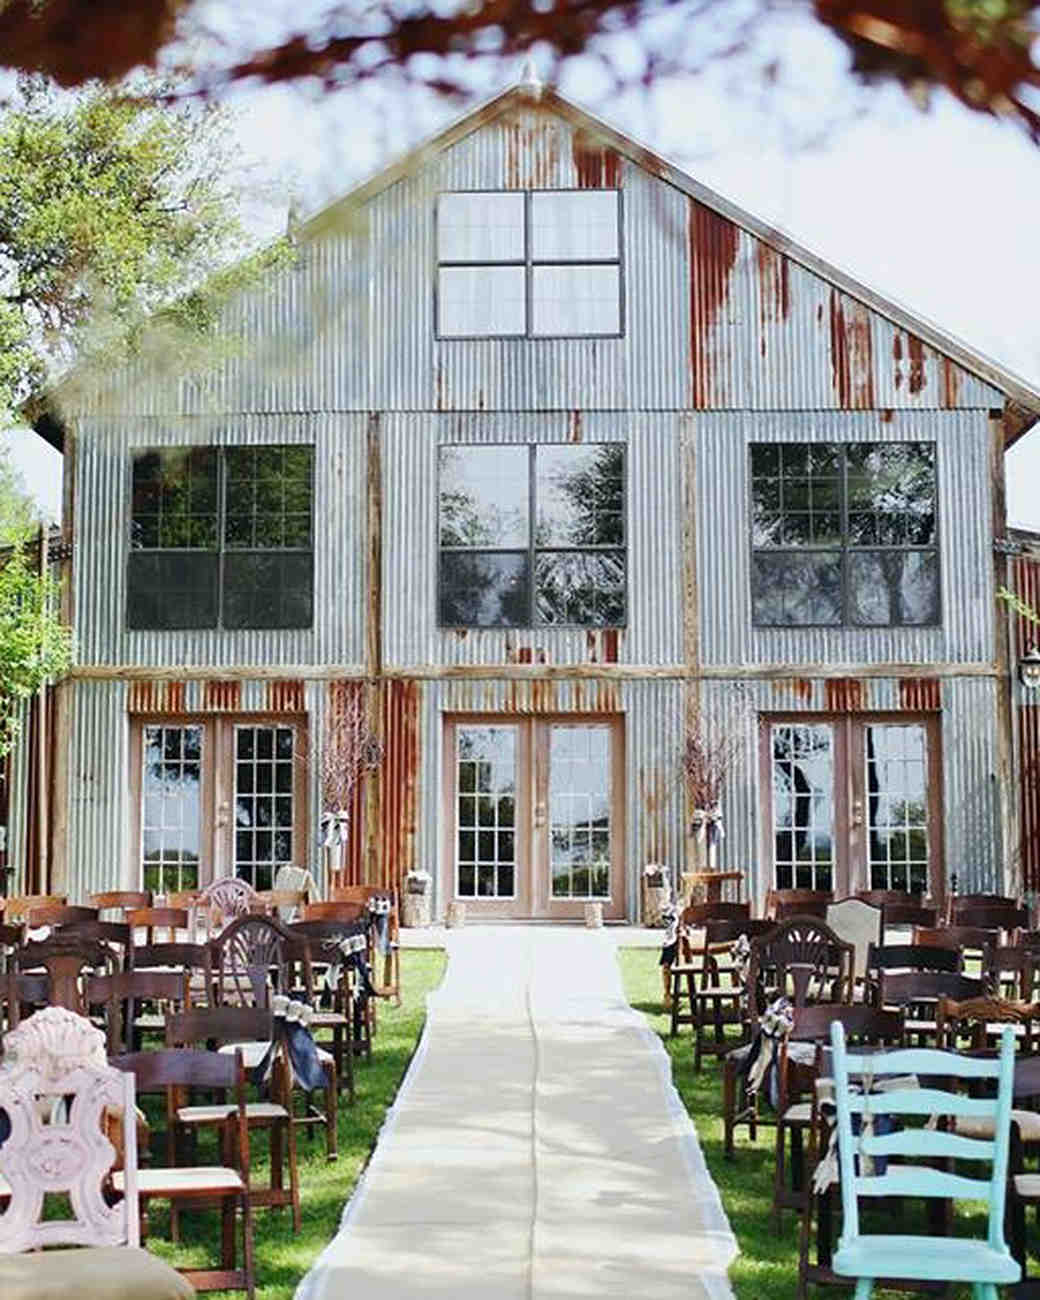 11 Rustic Wedding Venues to Book for Your Big Day | Martha ...